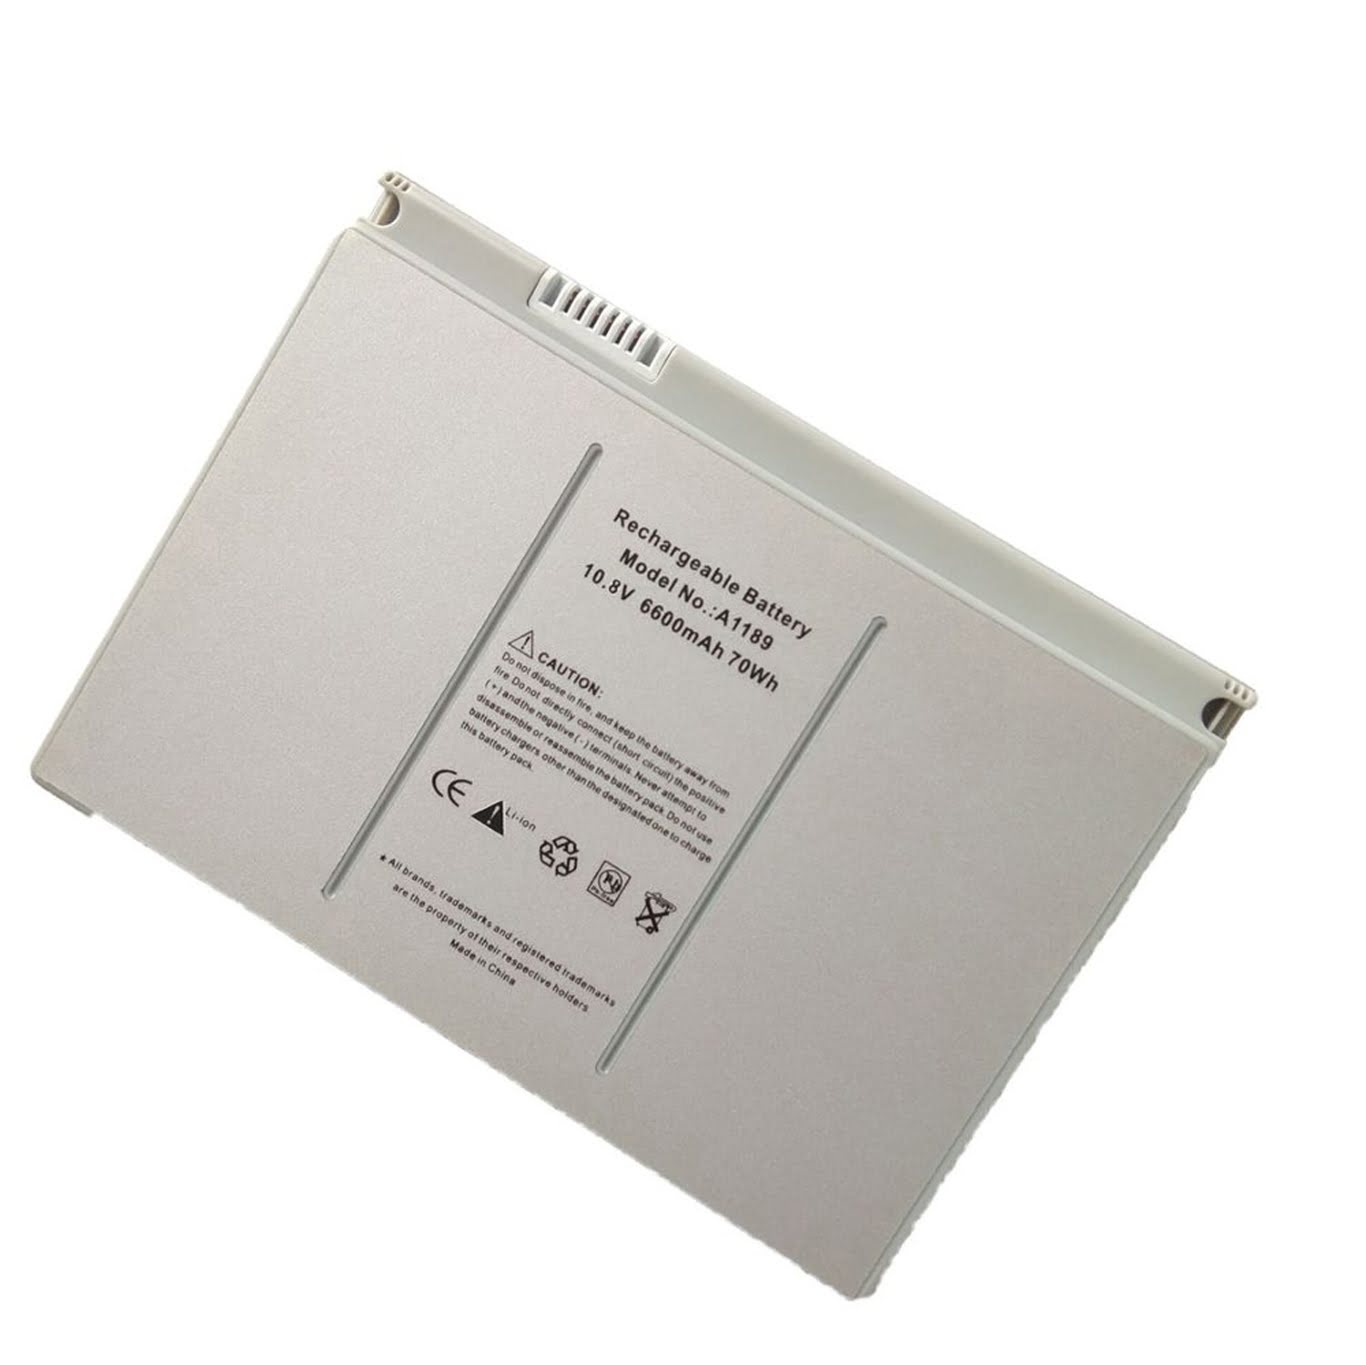 Apple 661-4618 A1189, Ma458 Ma458*/a Laptop Battery For Macbook Pro 17